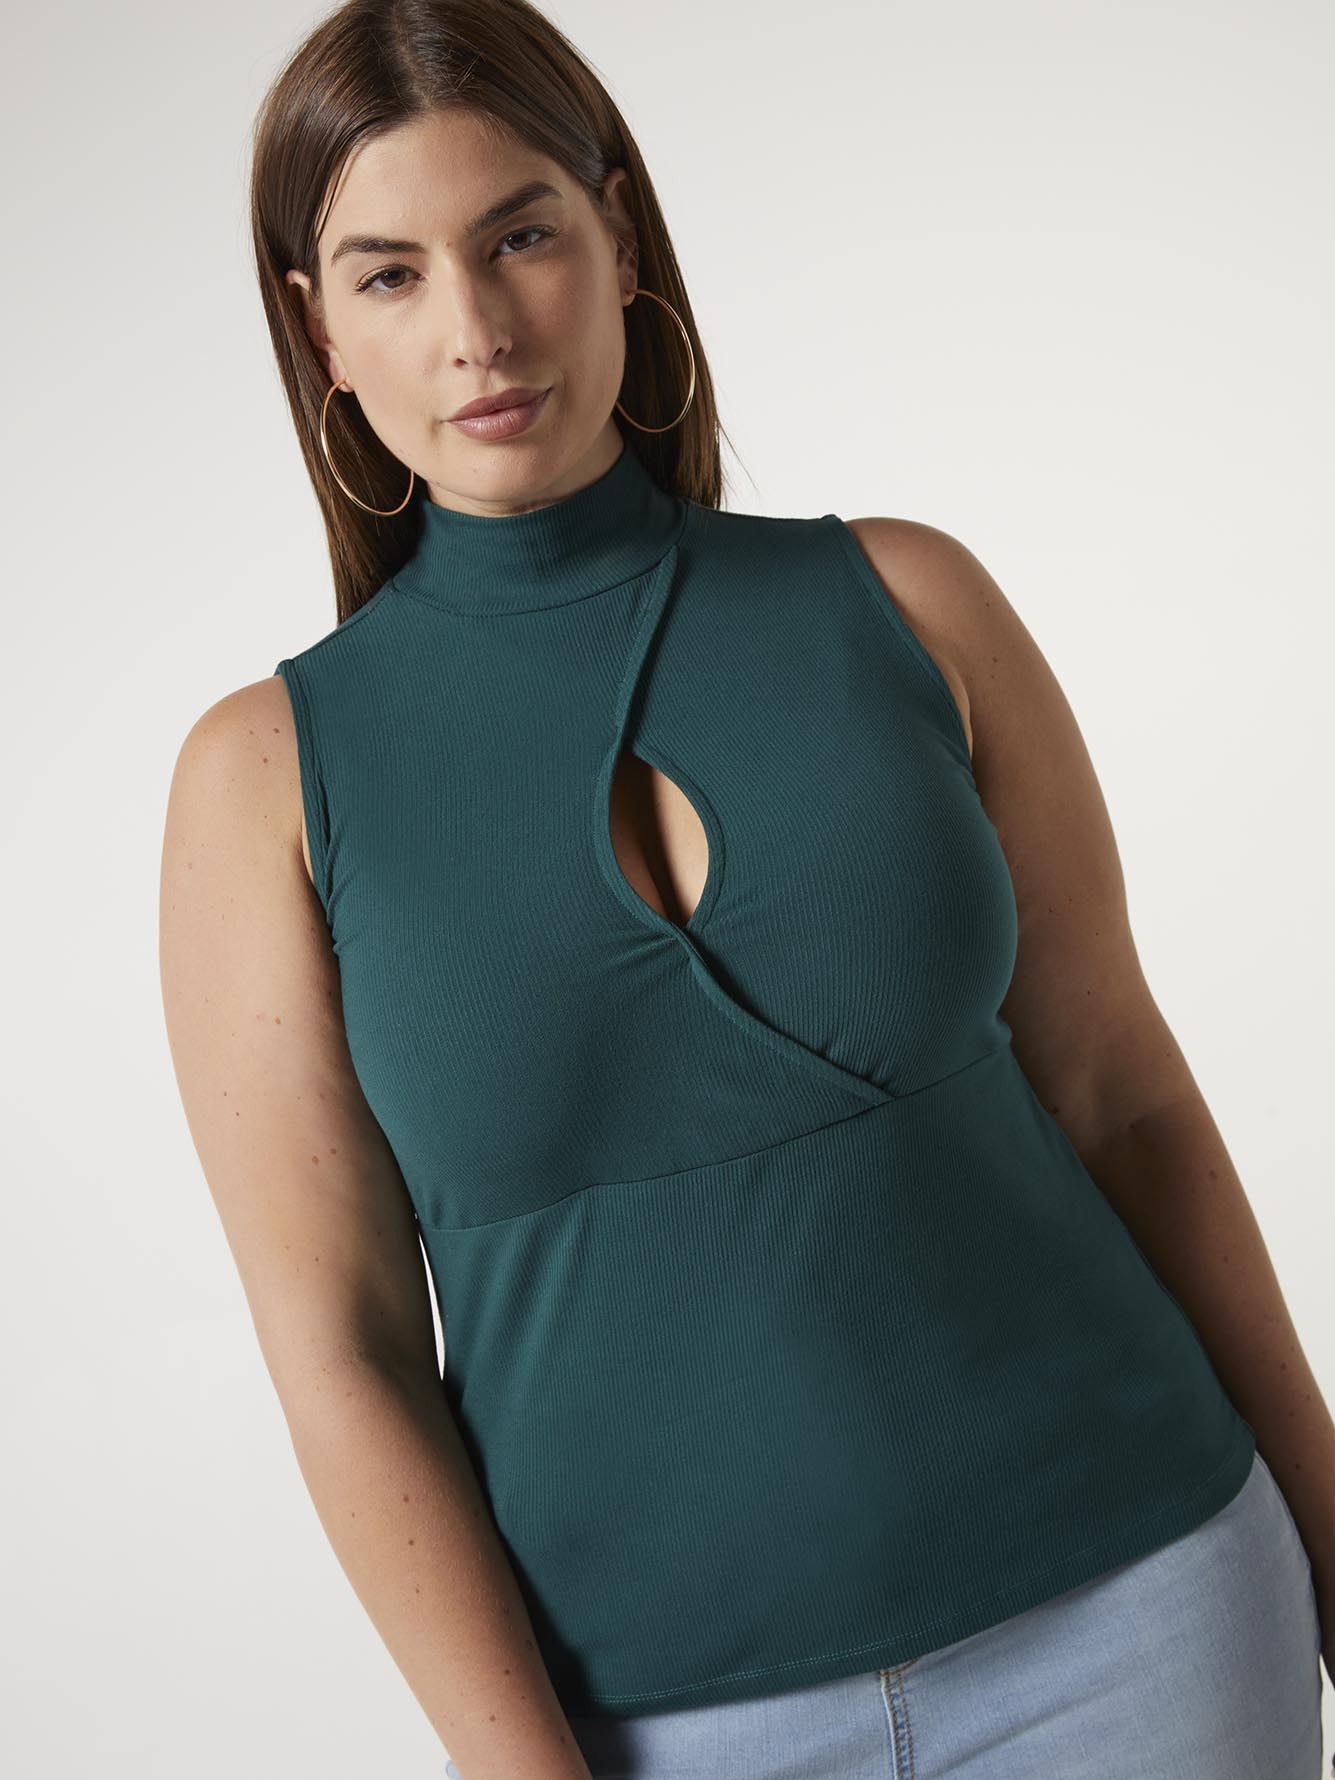 Sleeveless Top with Cross Over Front - Addition Elle